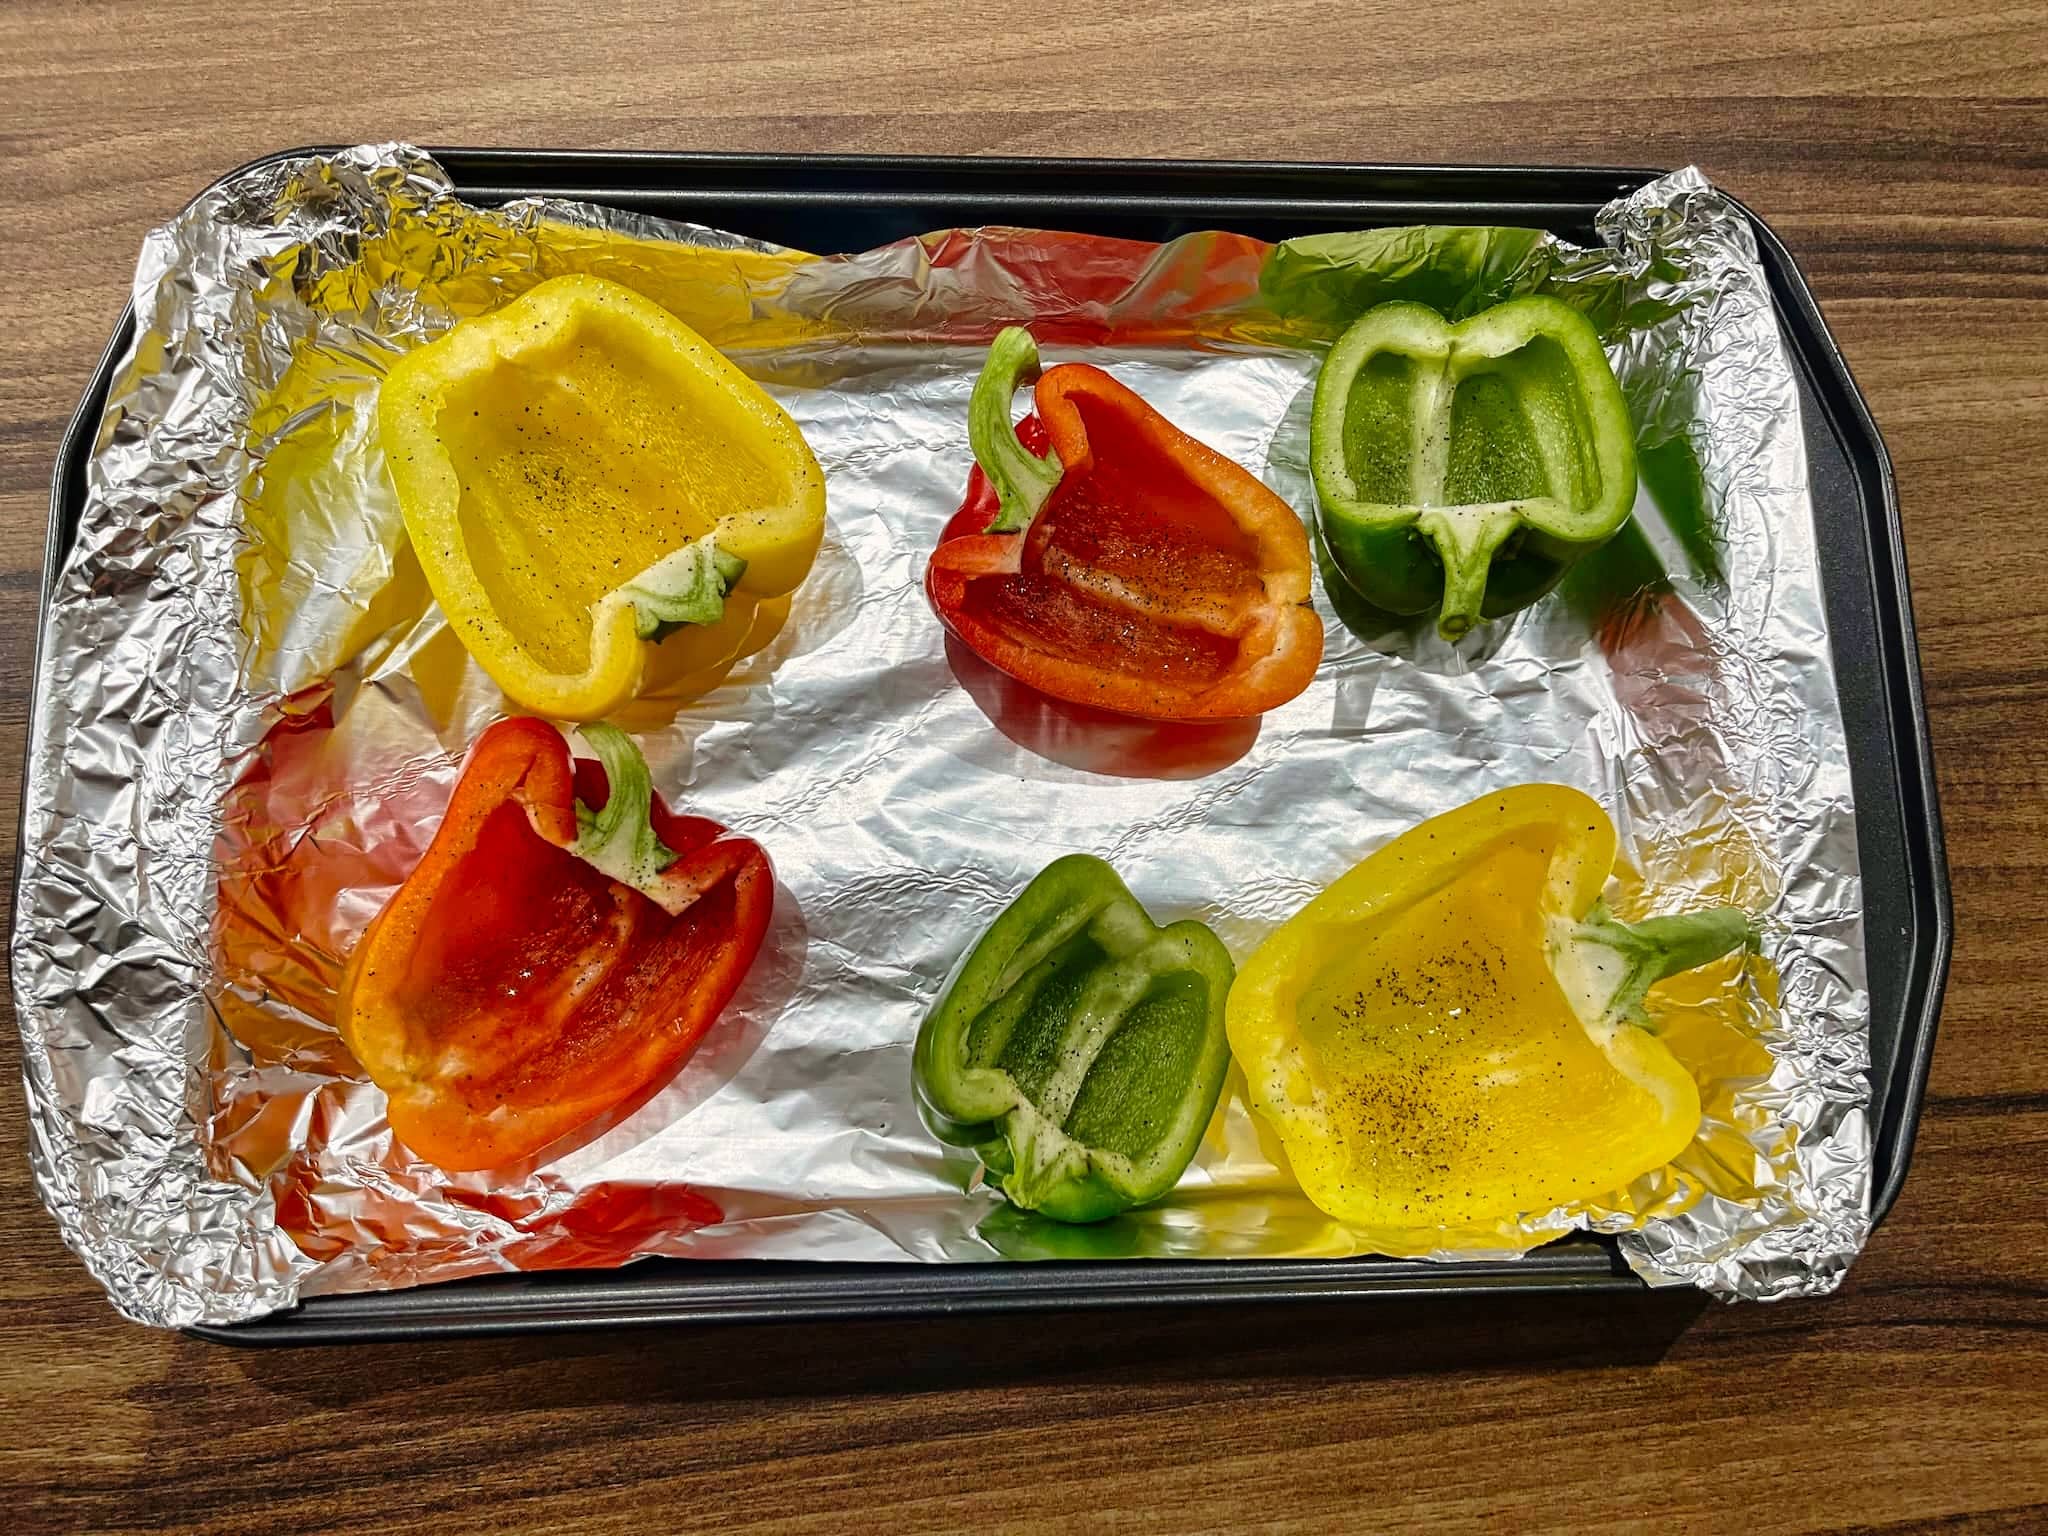 Halves of peppers prepared on a baking tray